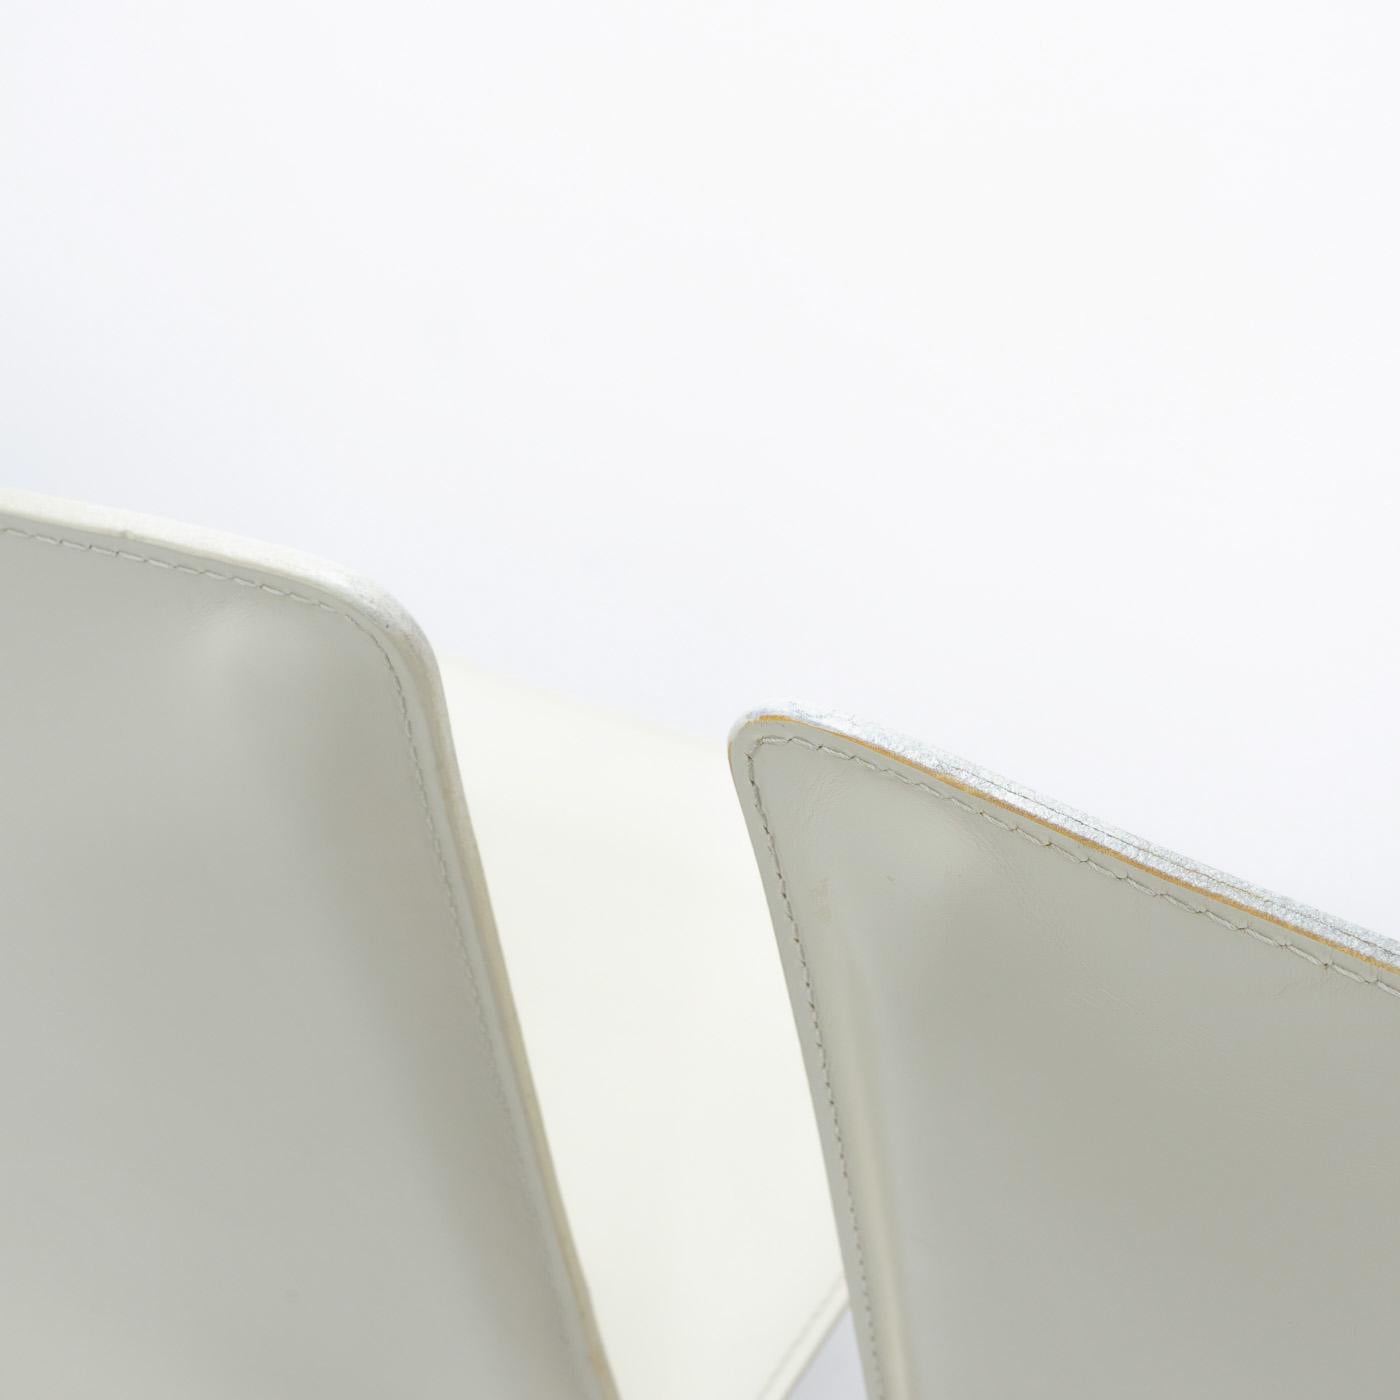 Cab 412 Chairs in Cream Leather by Mario Bellini for Cassina, Set of 4 For Sale 4